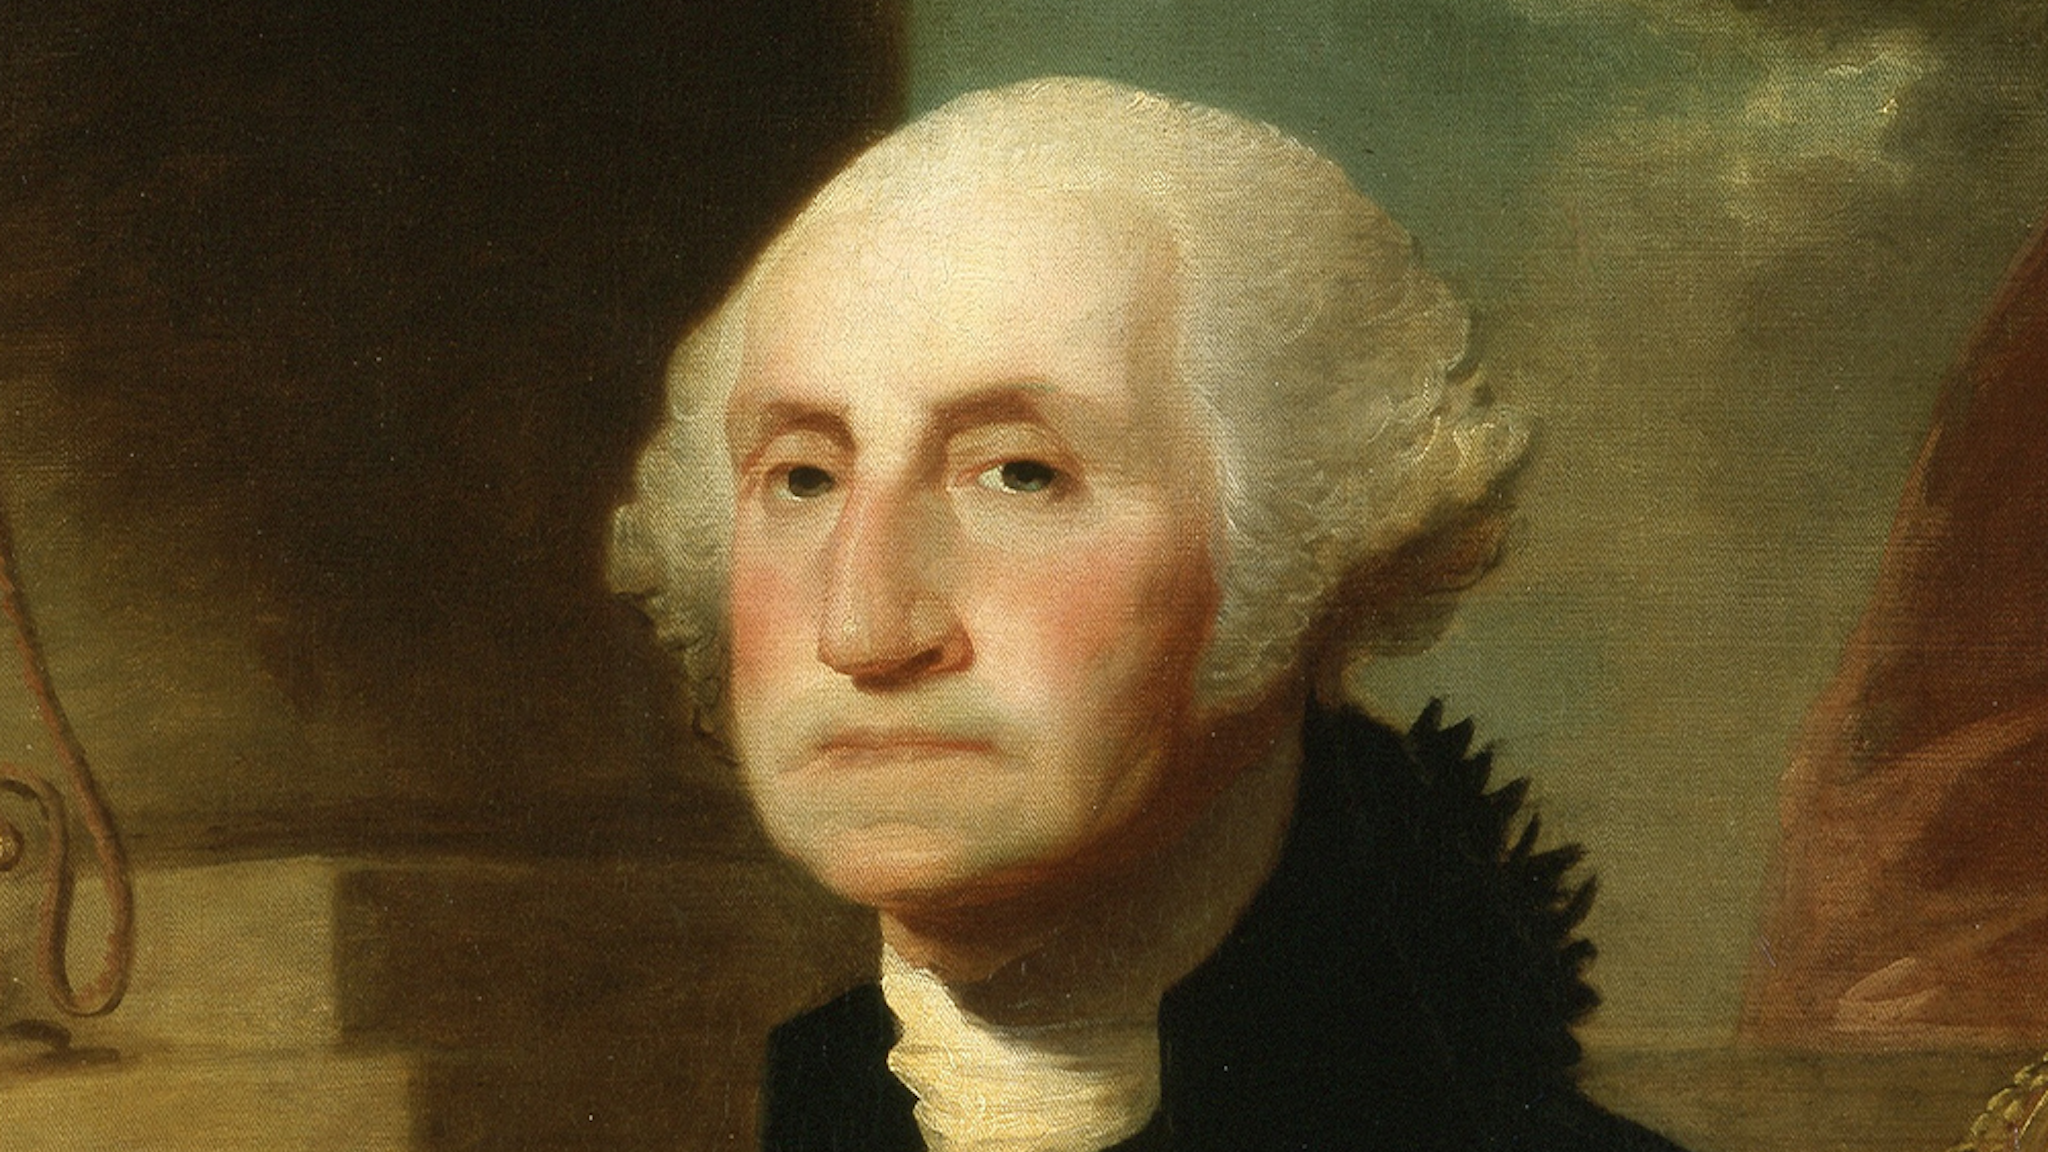 George Washington, portrait painting by Constable-Hamilton, 1794. From the New York Public Library.